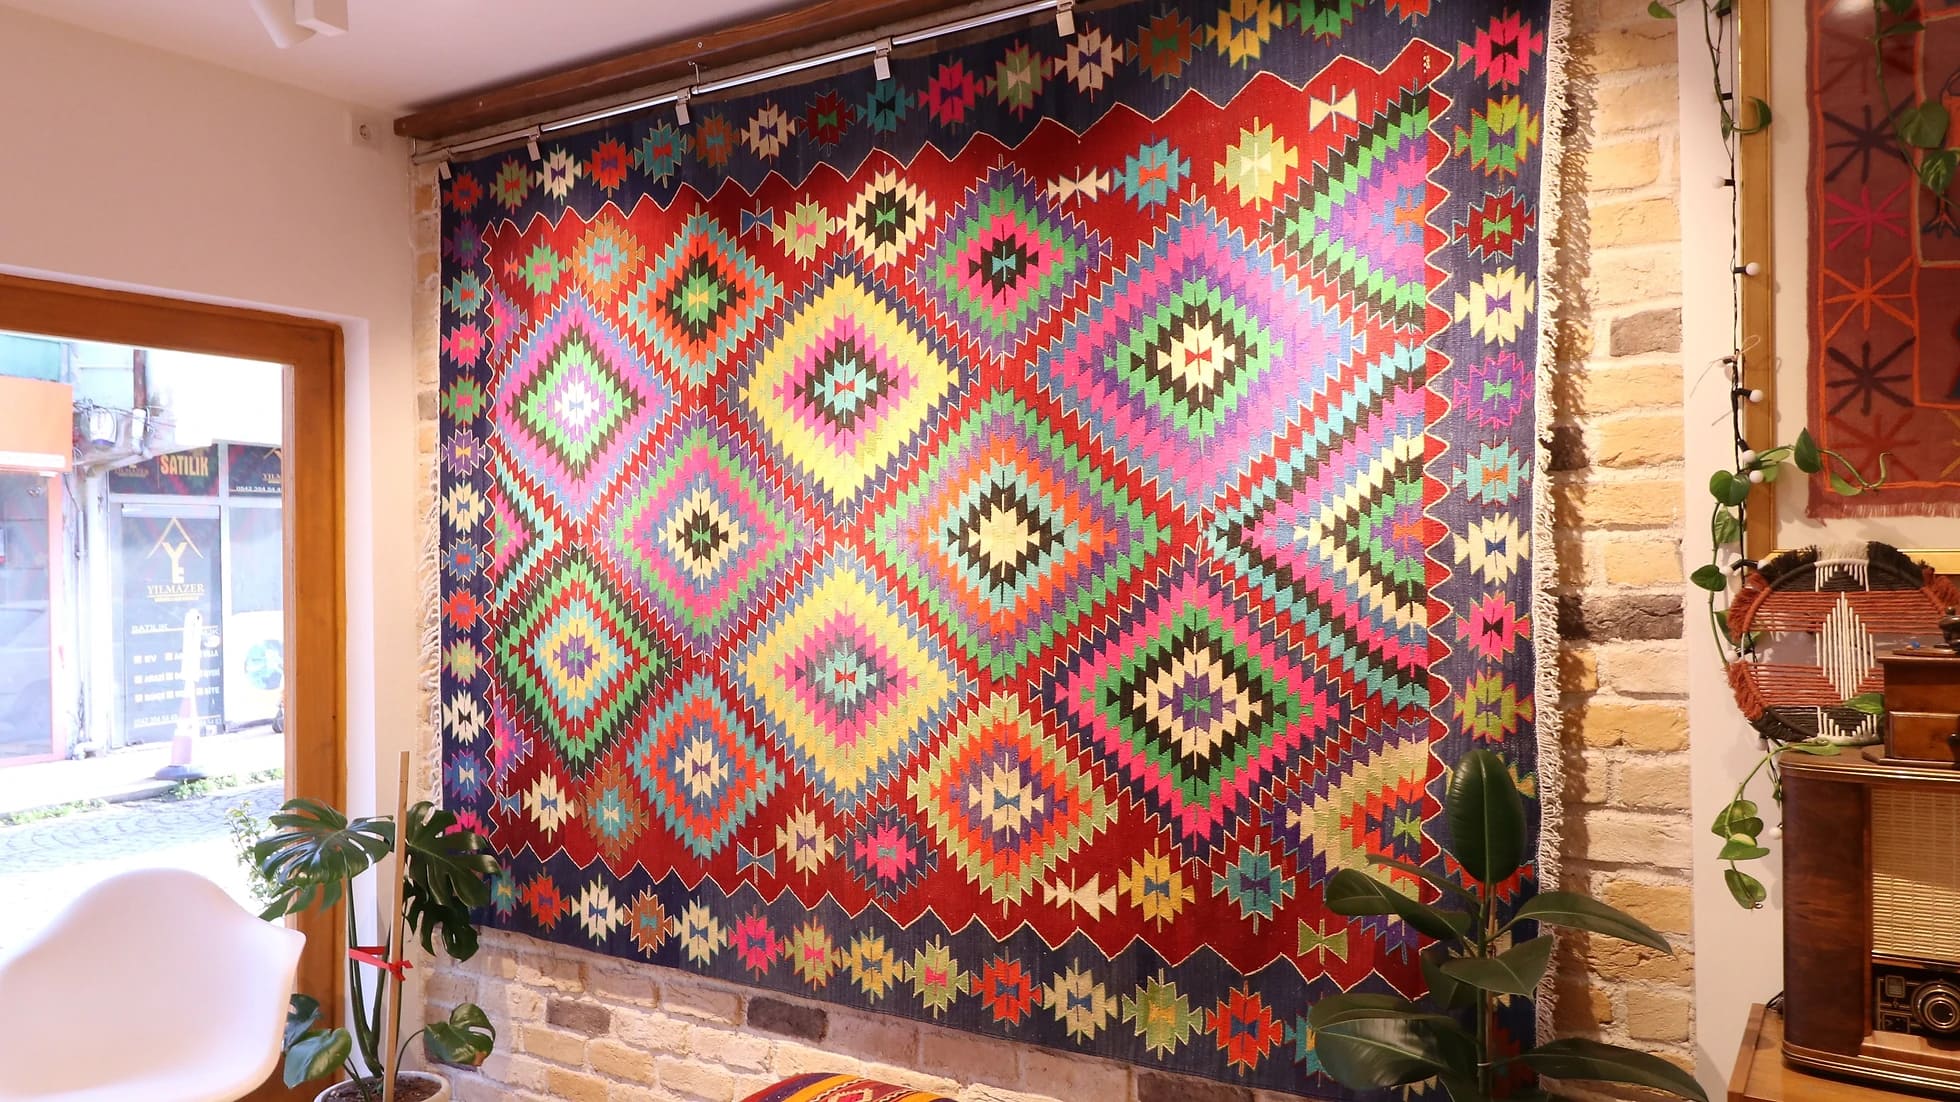 a magnificent and colorful large vintage rug from turkey in traditional motifs and modern style hanging on the wall like a quilt or tapestry